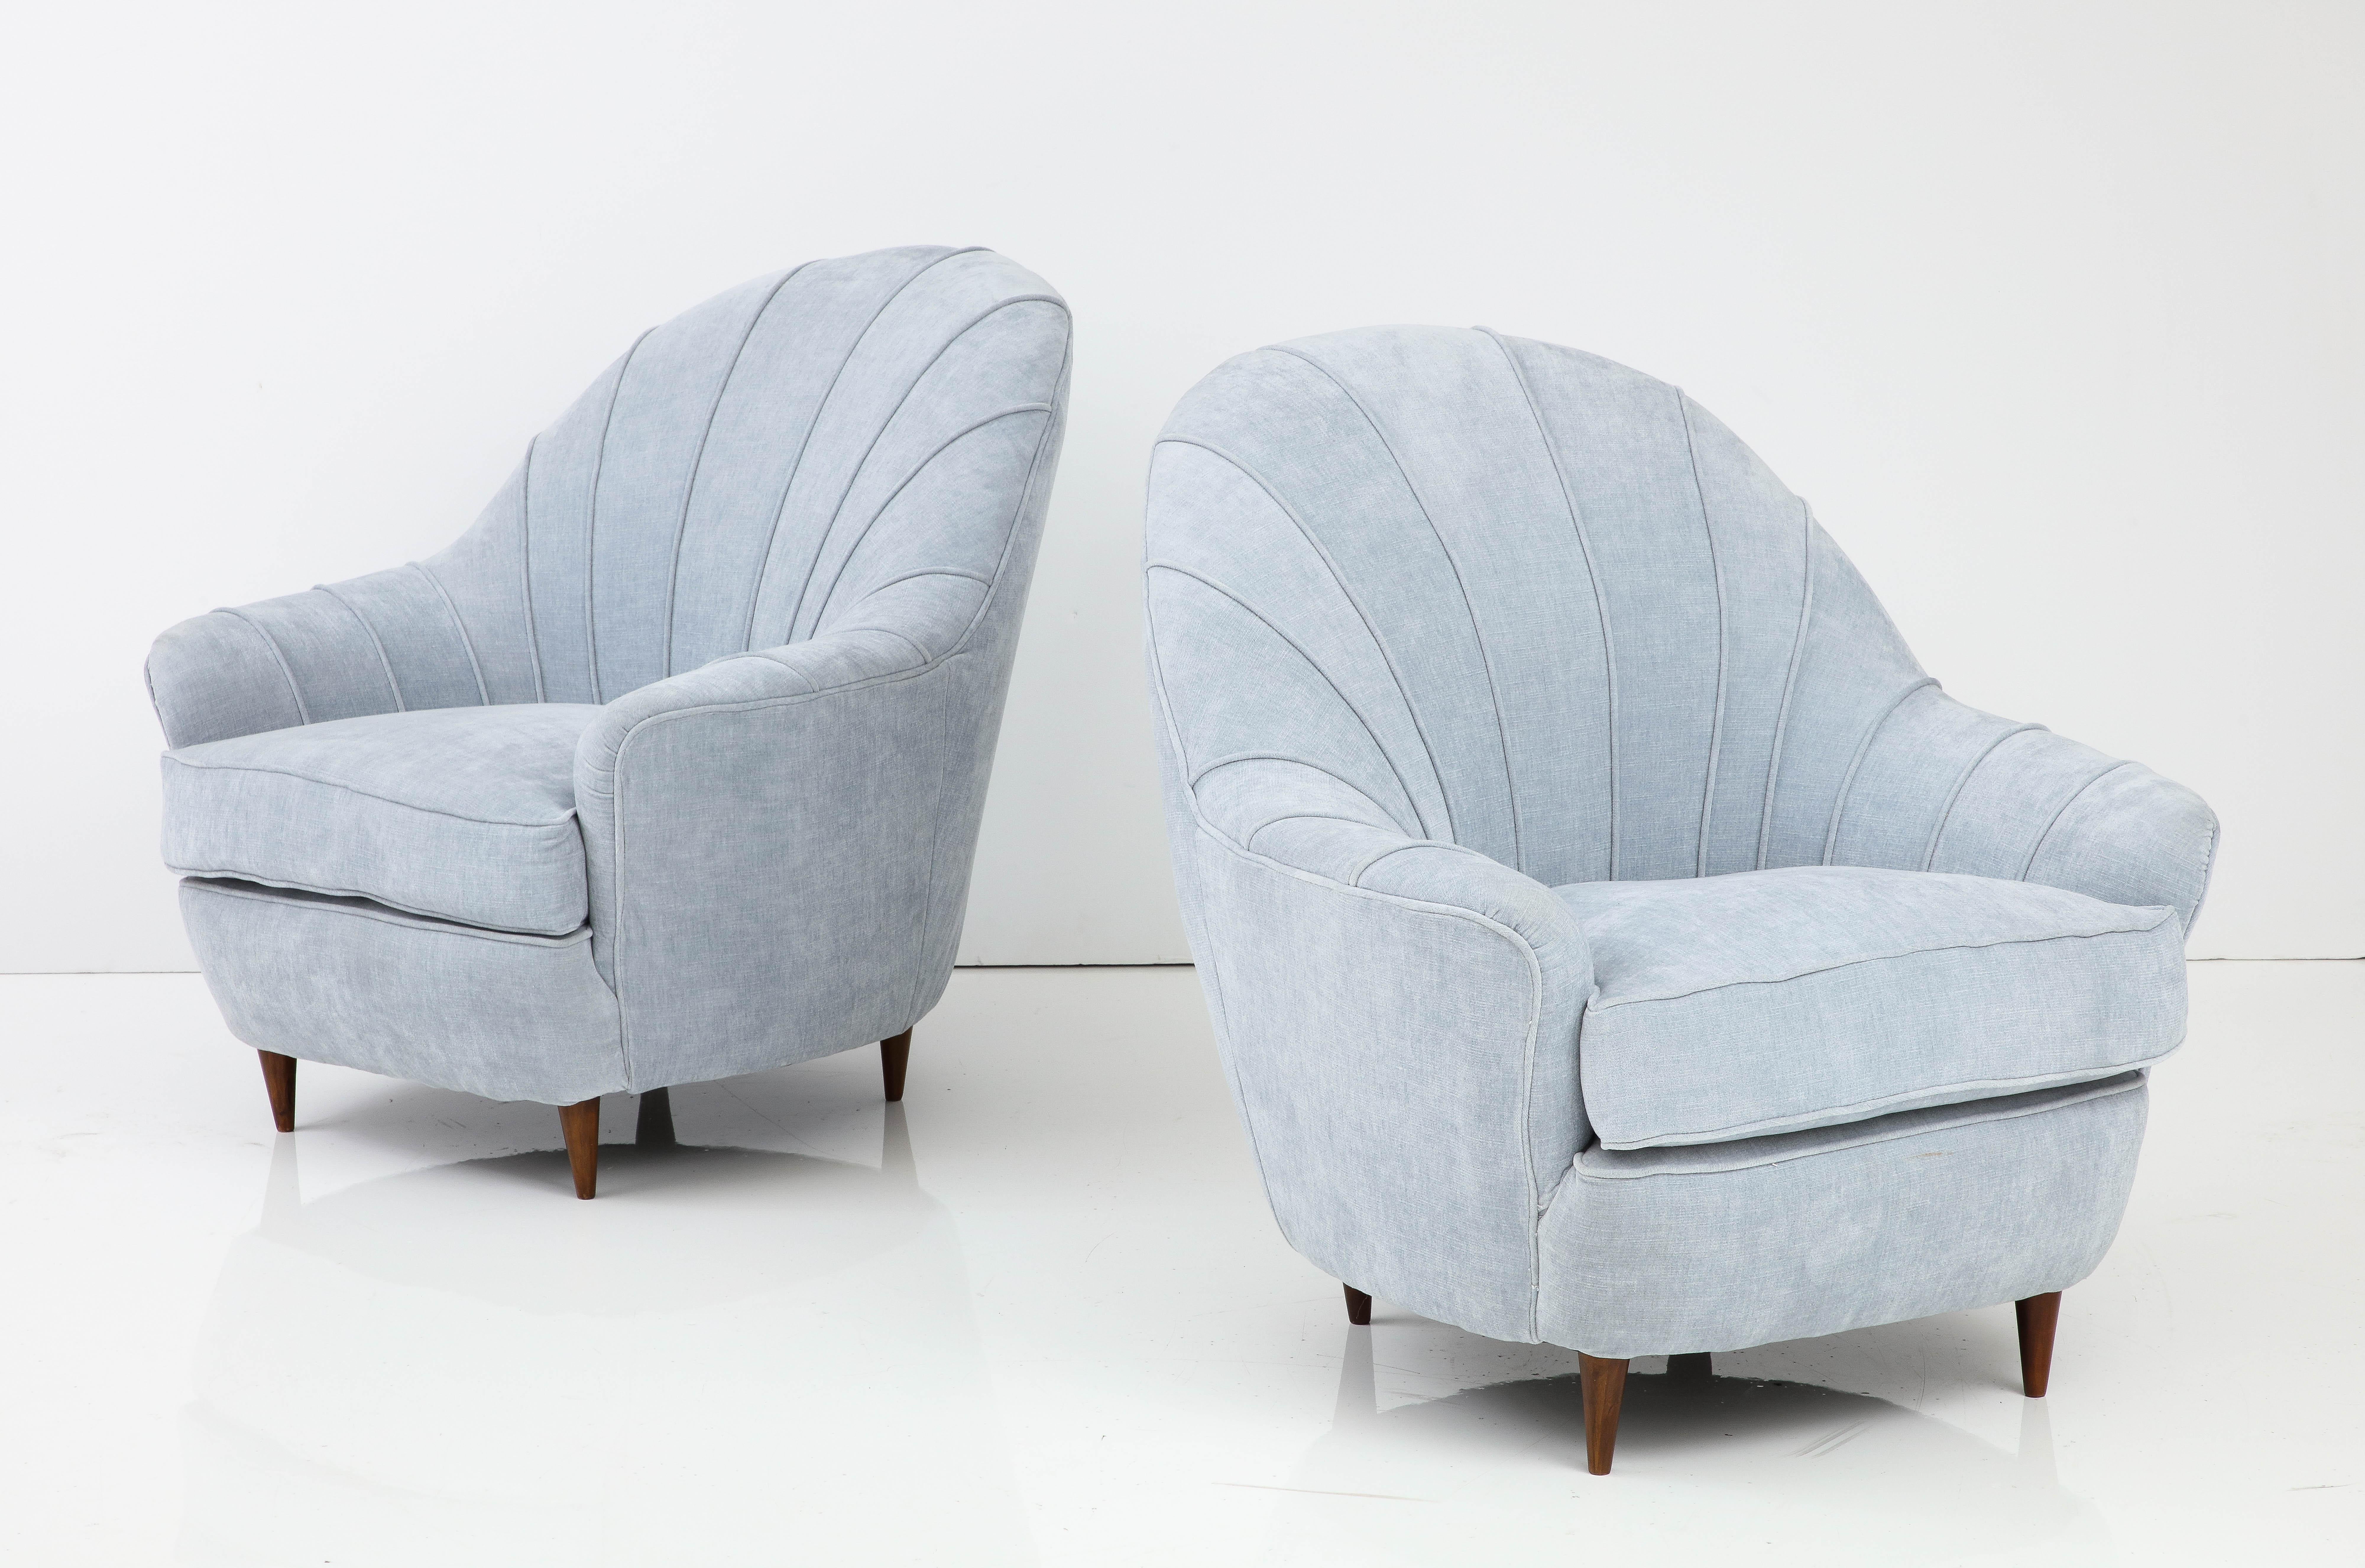 Mid-20th Century Gio Ponti Style 1950's Italian Lounge Chairs For Sale